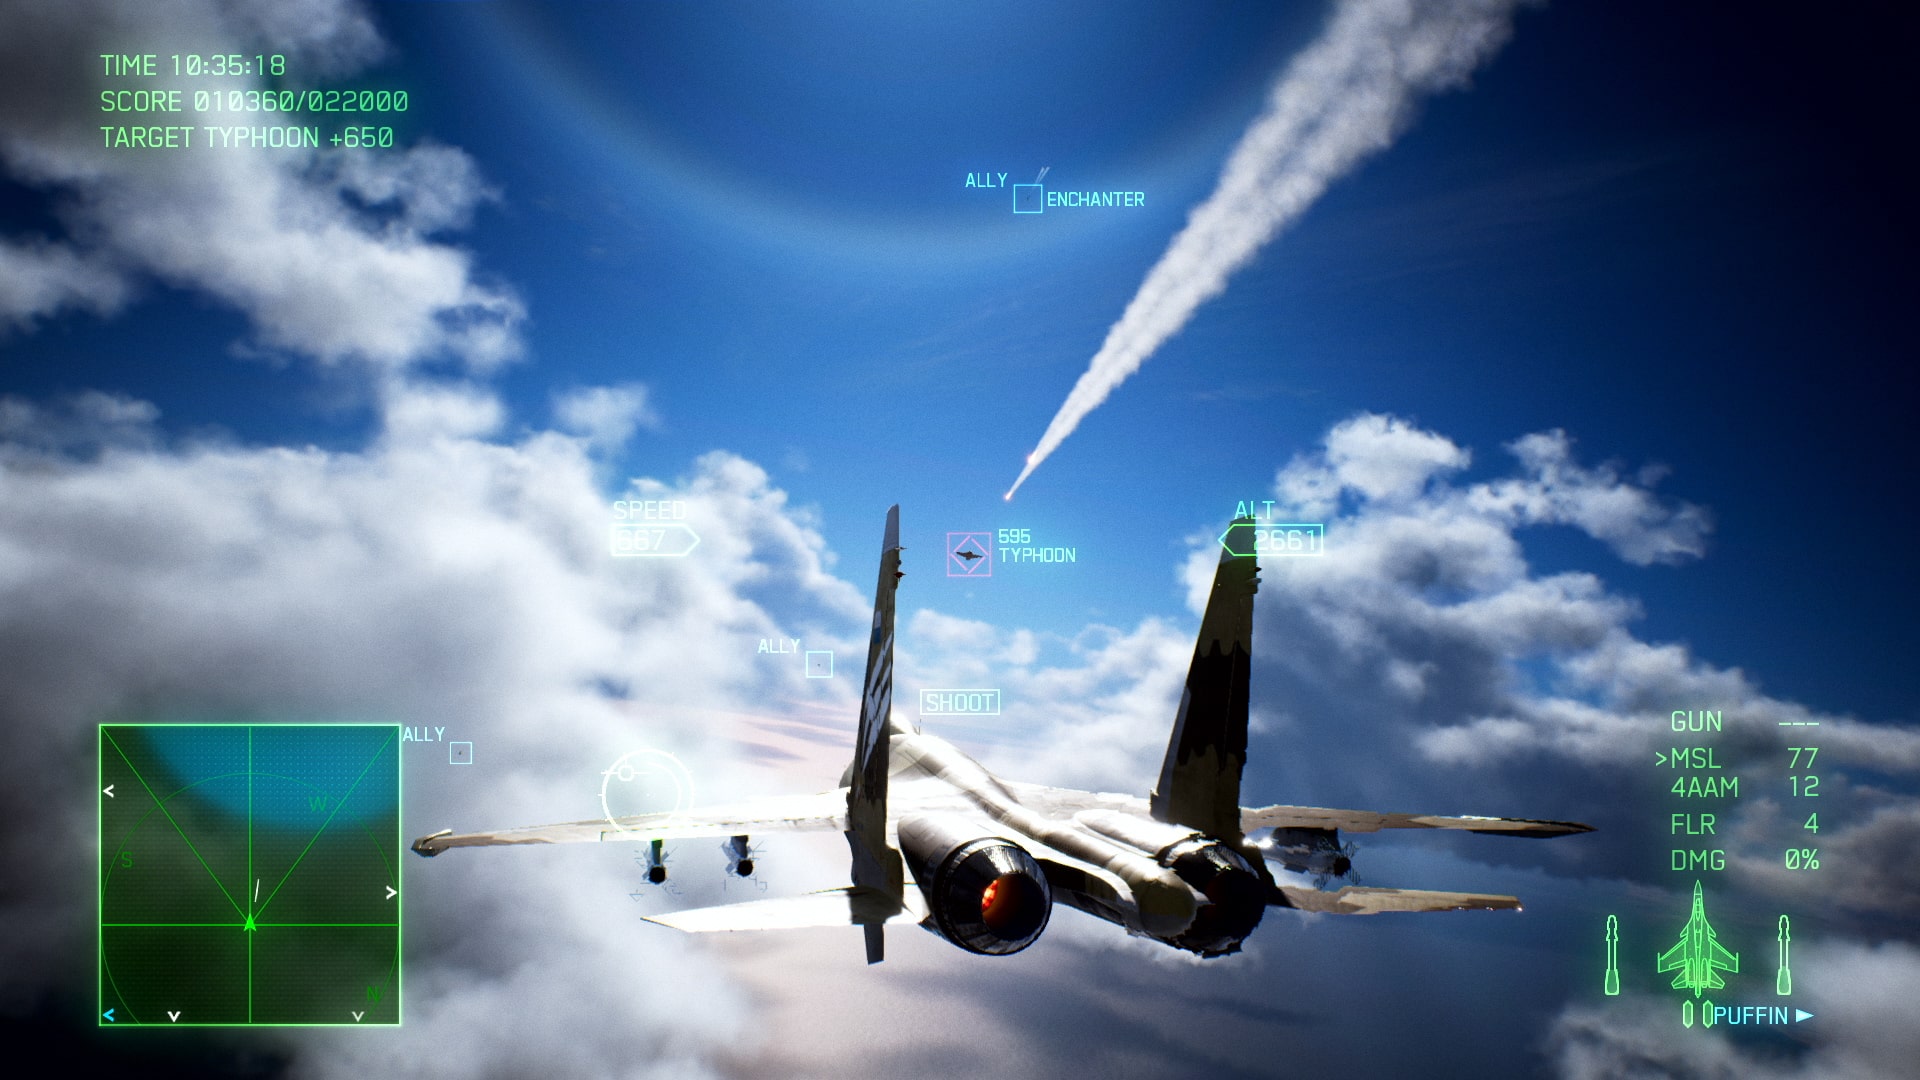 Ace Combat 7: Skies Unknown - Unexpected Visitor Box Shot for PlayStation 4  - GameFAQs